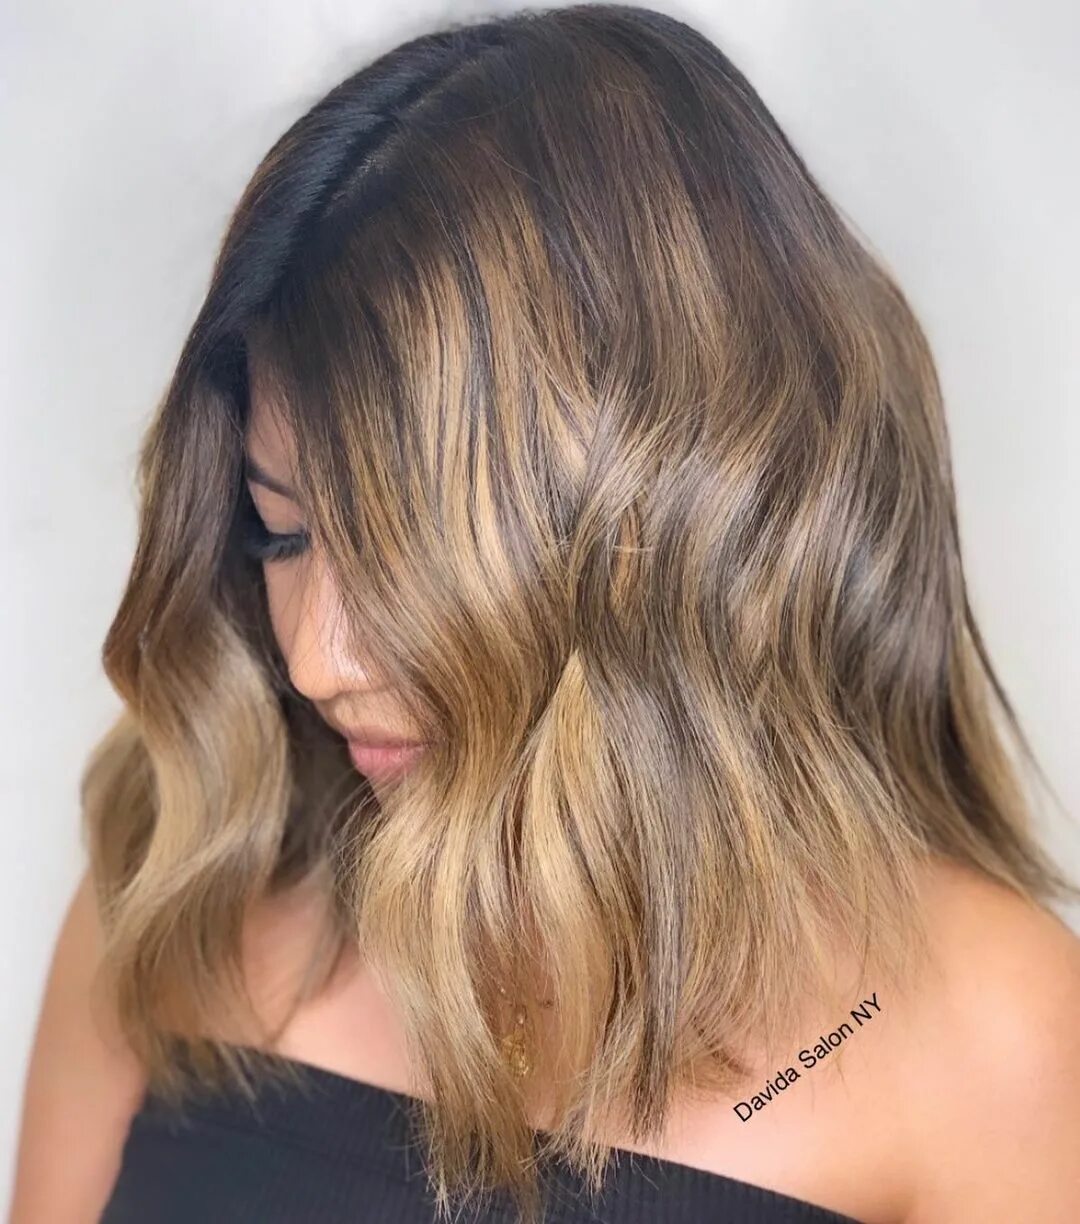 NYC HAIR SALON в Instagram: "Bronde 🎨 balayage with root shadow and @...